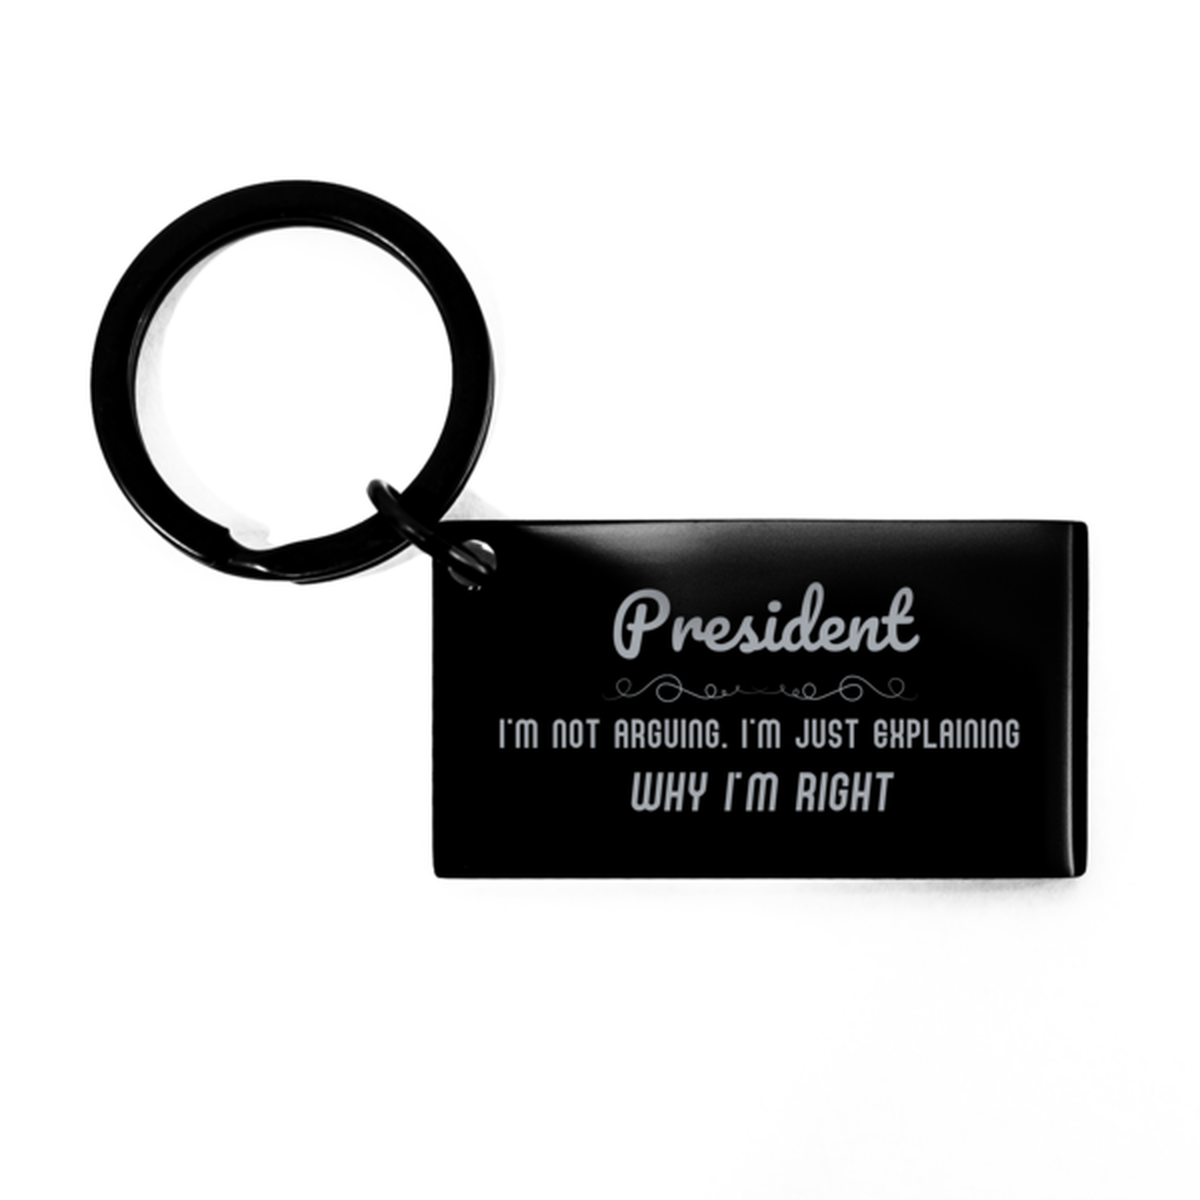 President I'm not Arguing. I'm Just Explaining Why I'm RIGHT Keychain, Funny Saying Quote President Gifts For President Graduation Birthday Christmas Gifts for Men Women Coworker